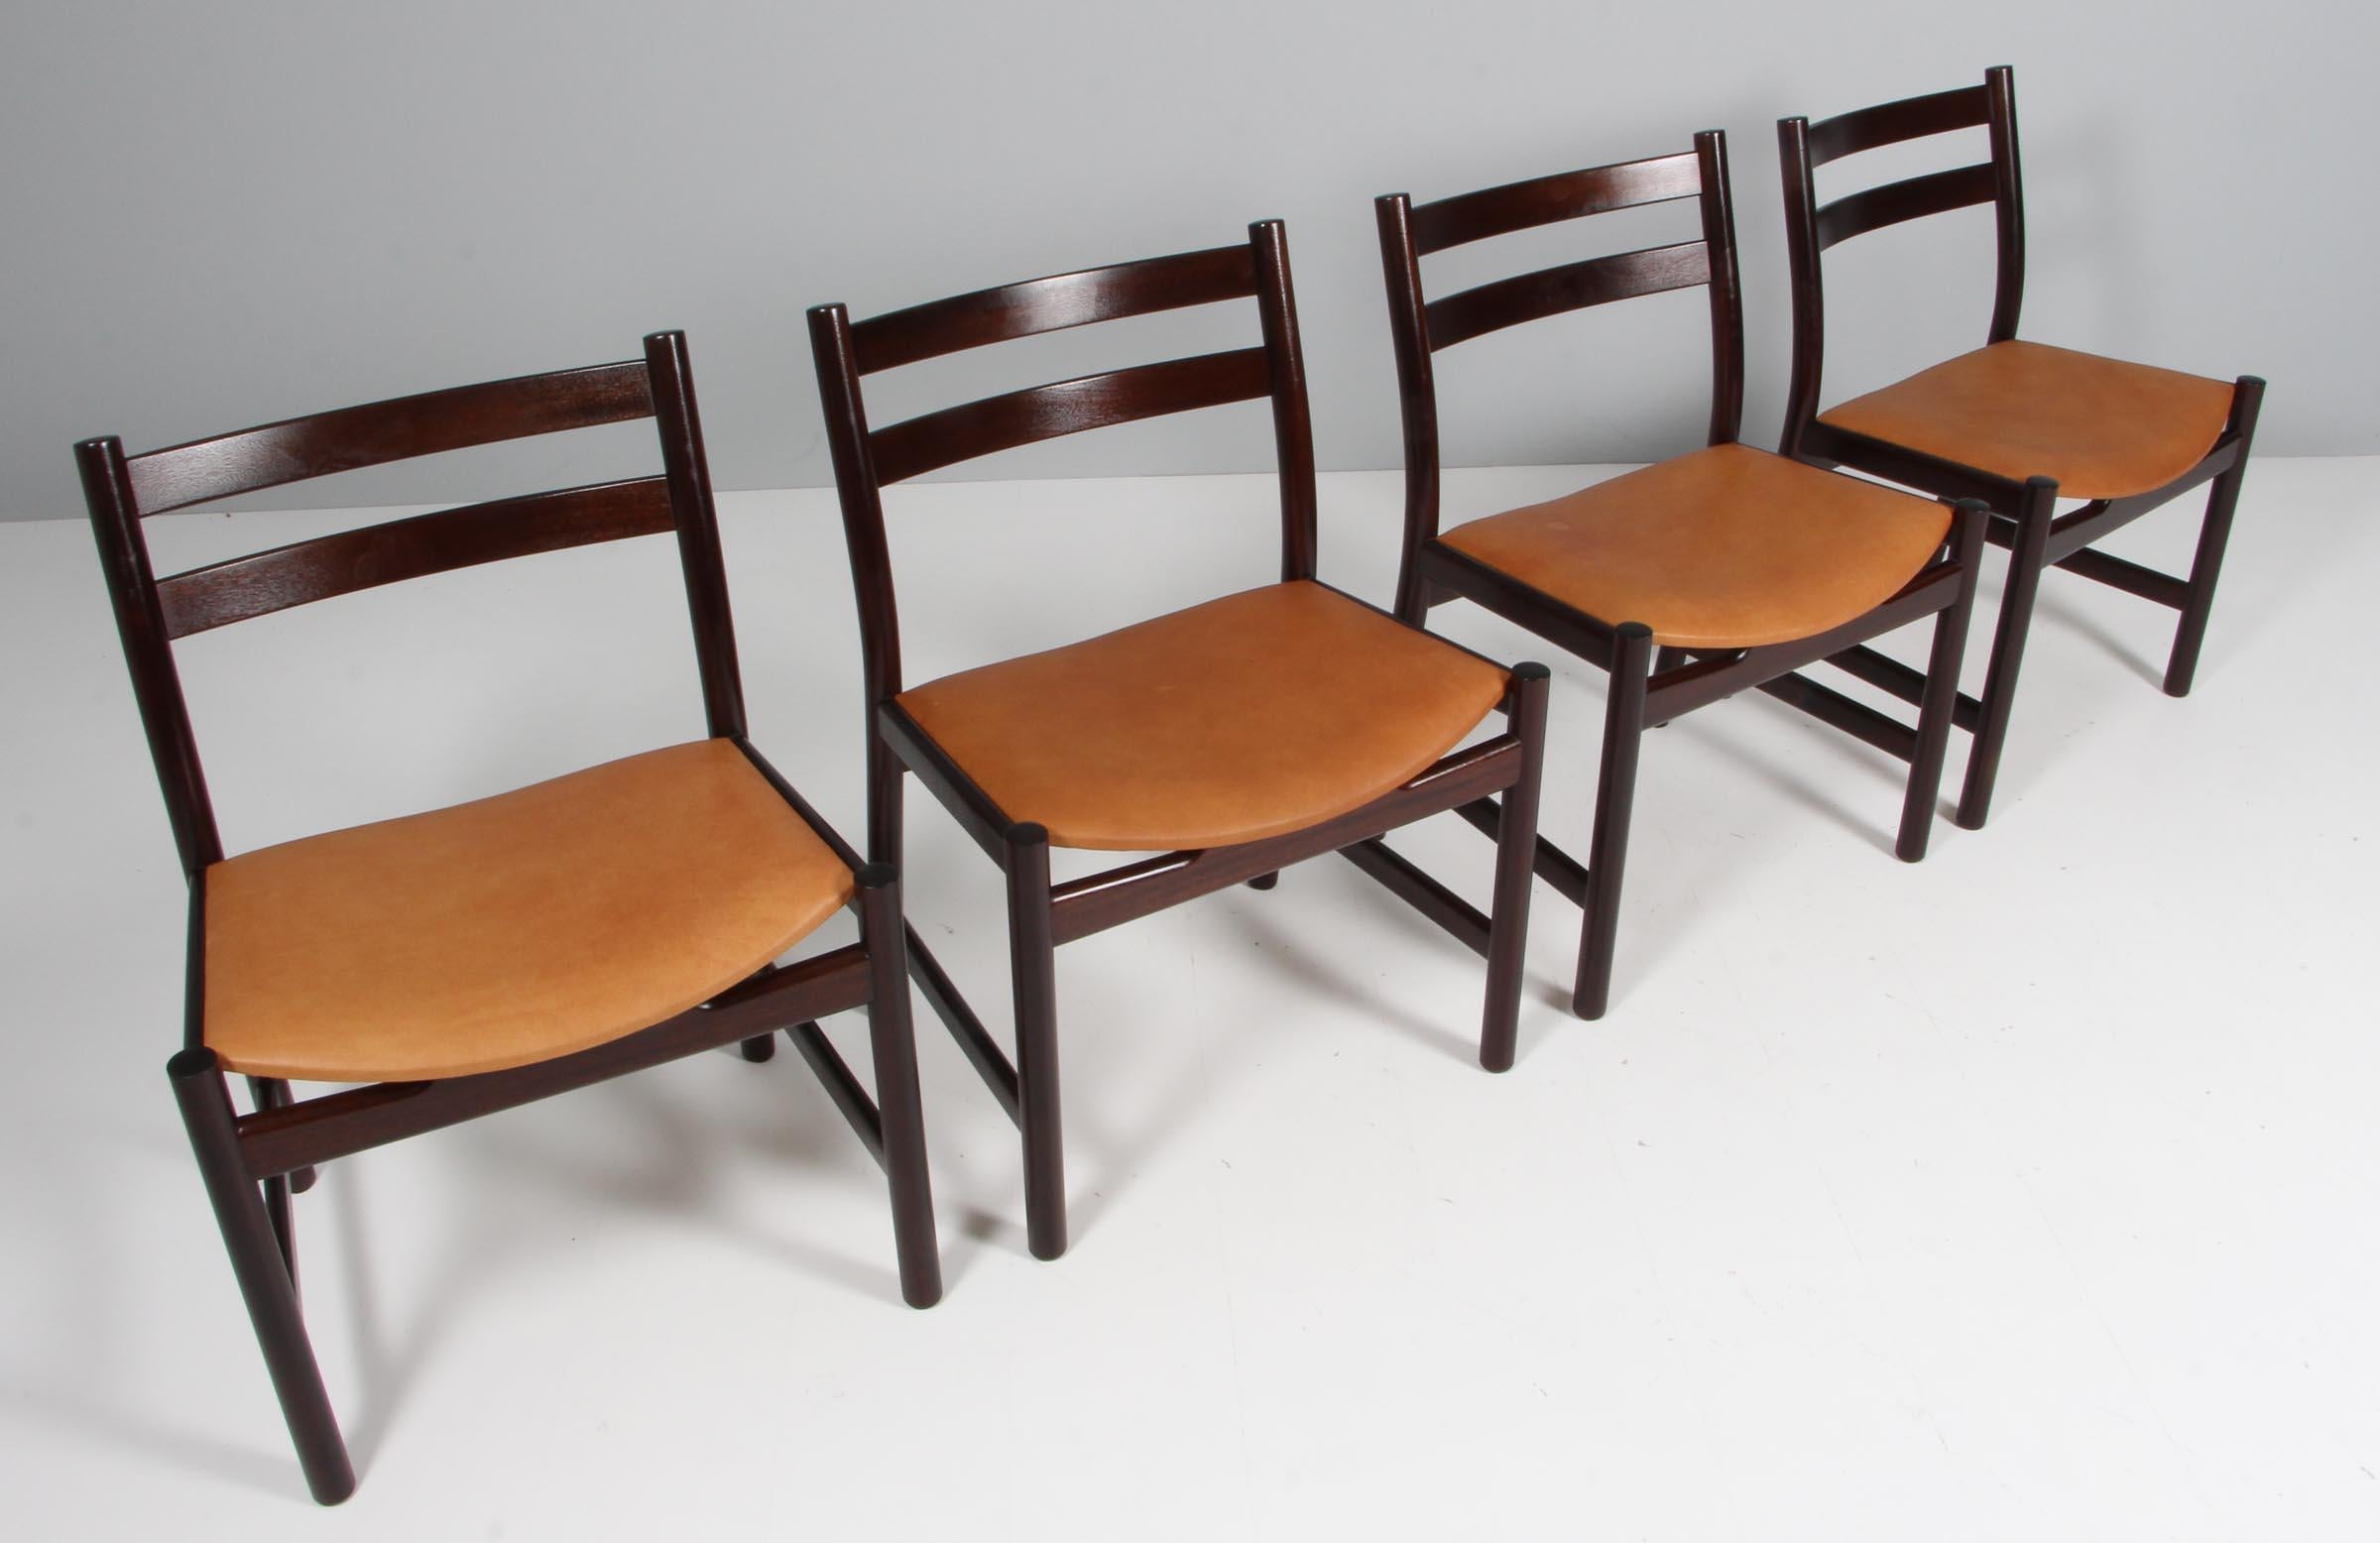 Set of four Hans J. Wegner dining chairs in mahogany

New upholstetred with vintage tan aniline leather.

Made by Carl Hansen, model CH47


Hans J. Wegner was born in 1914 in Tønder in Southern Denmark, the son of a Shoemaker. At the age of 17, he